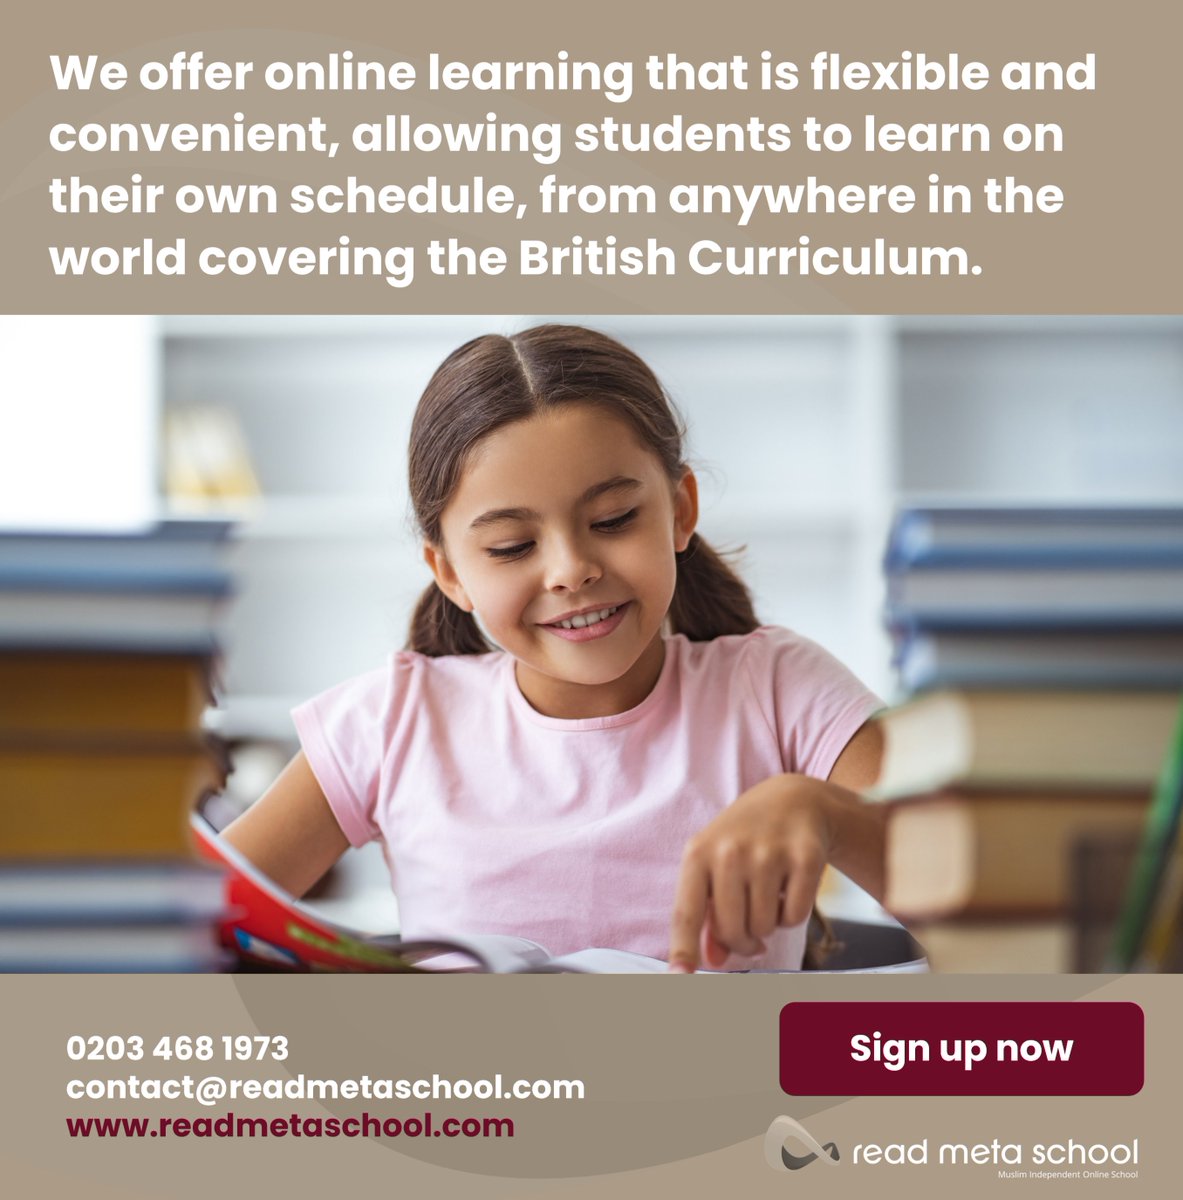 Online learning allows students to access resources when they need it, without the need for travel or a fixed timetable. We believe that online learning is the perfect solution for busy students who want to achieve academic success.

#ReadMetaSchool #21stCenturyEducation